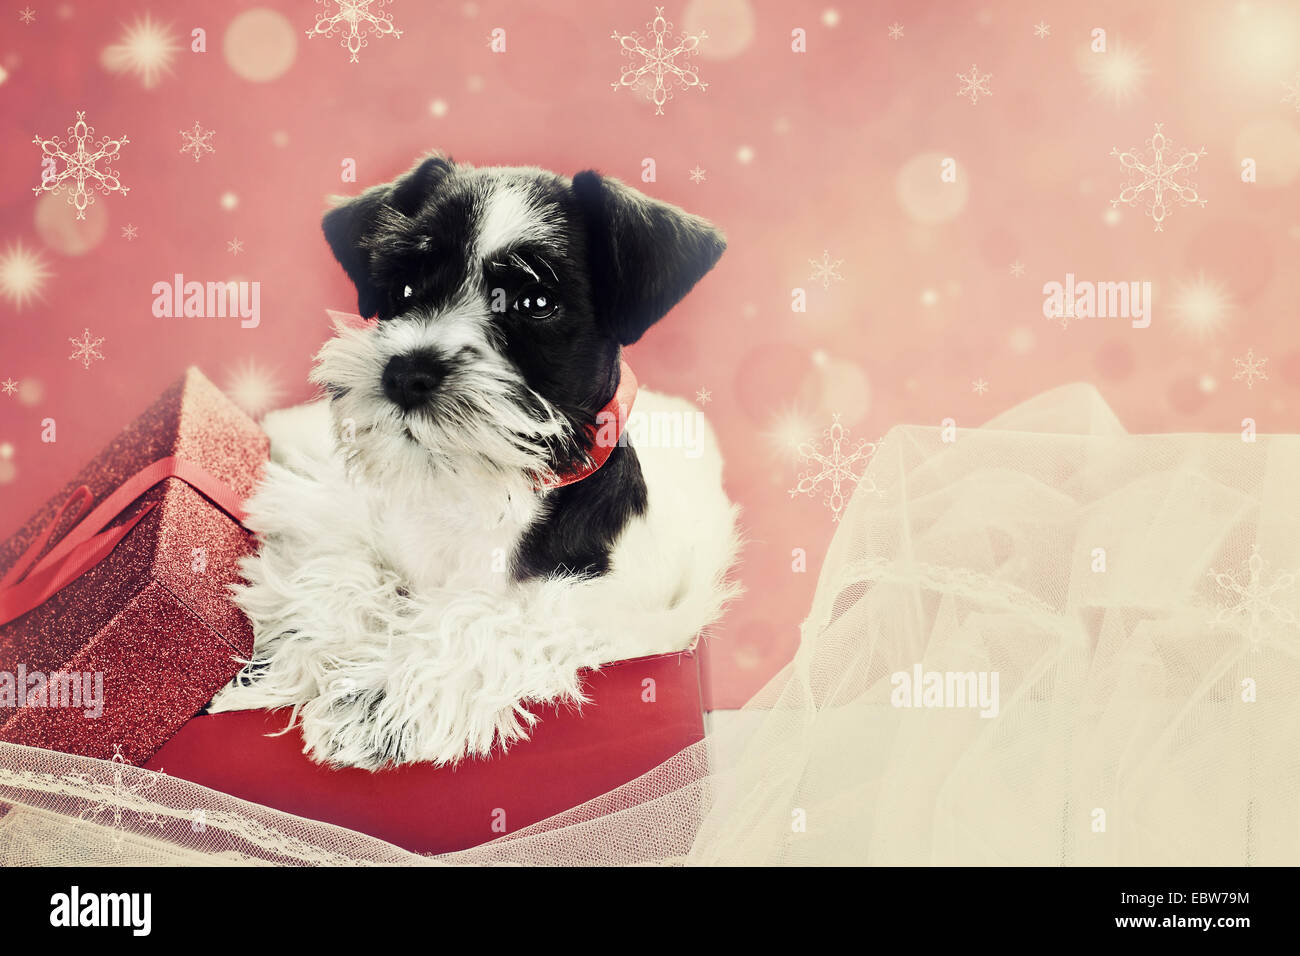 Retro image of a cute little black and white Mini Schnauzer puppy peeping out of a beautiful red festive Christmas present. Stock Photo